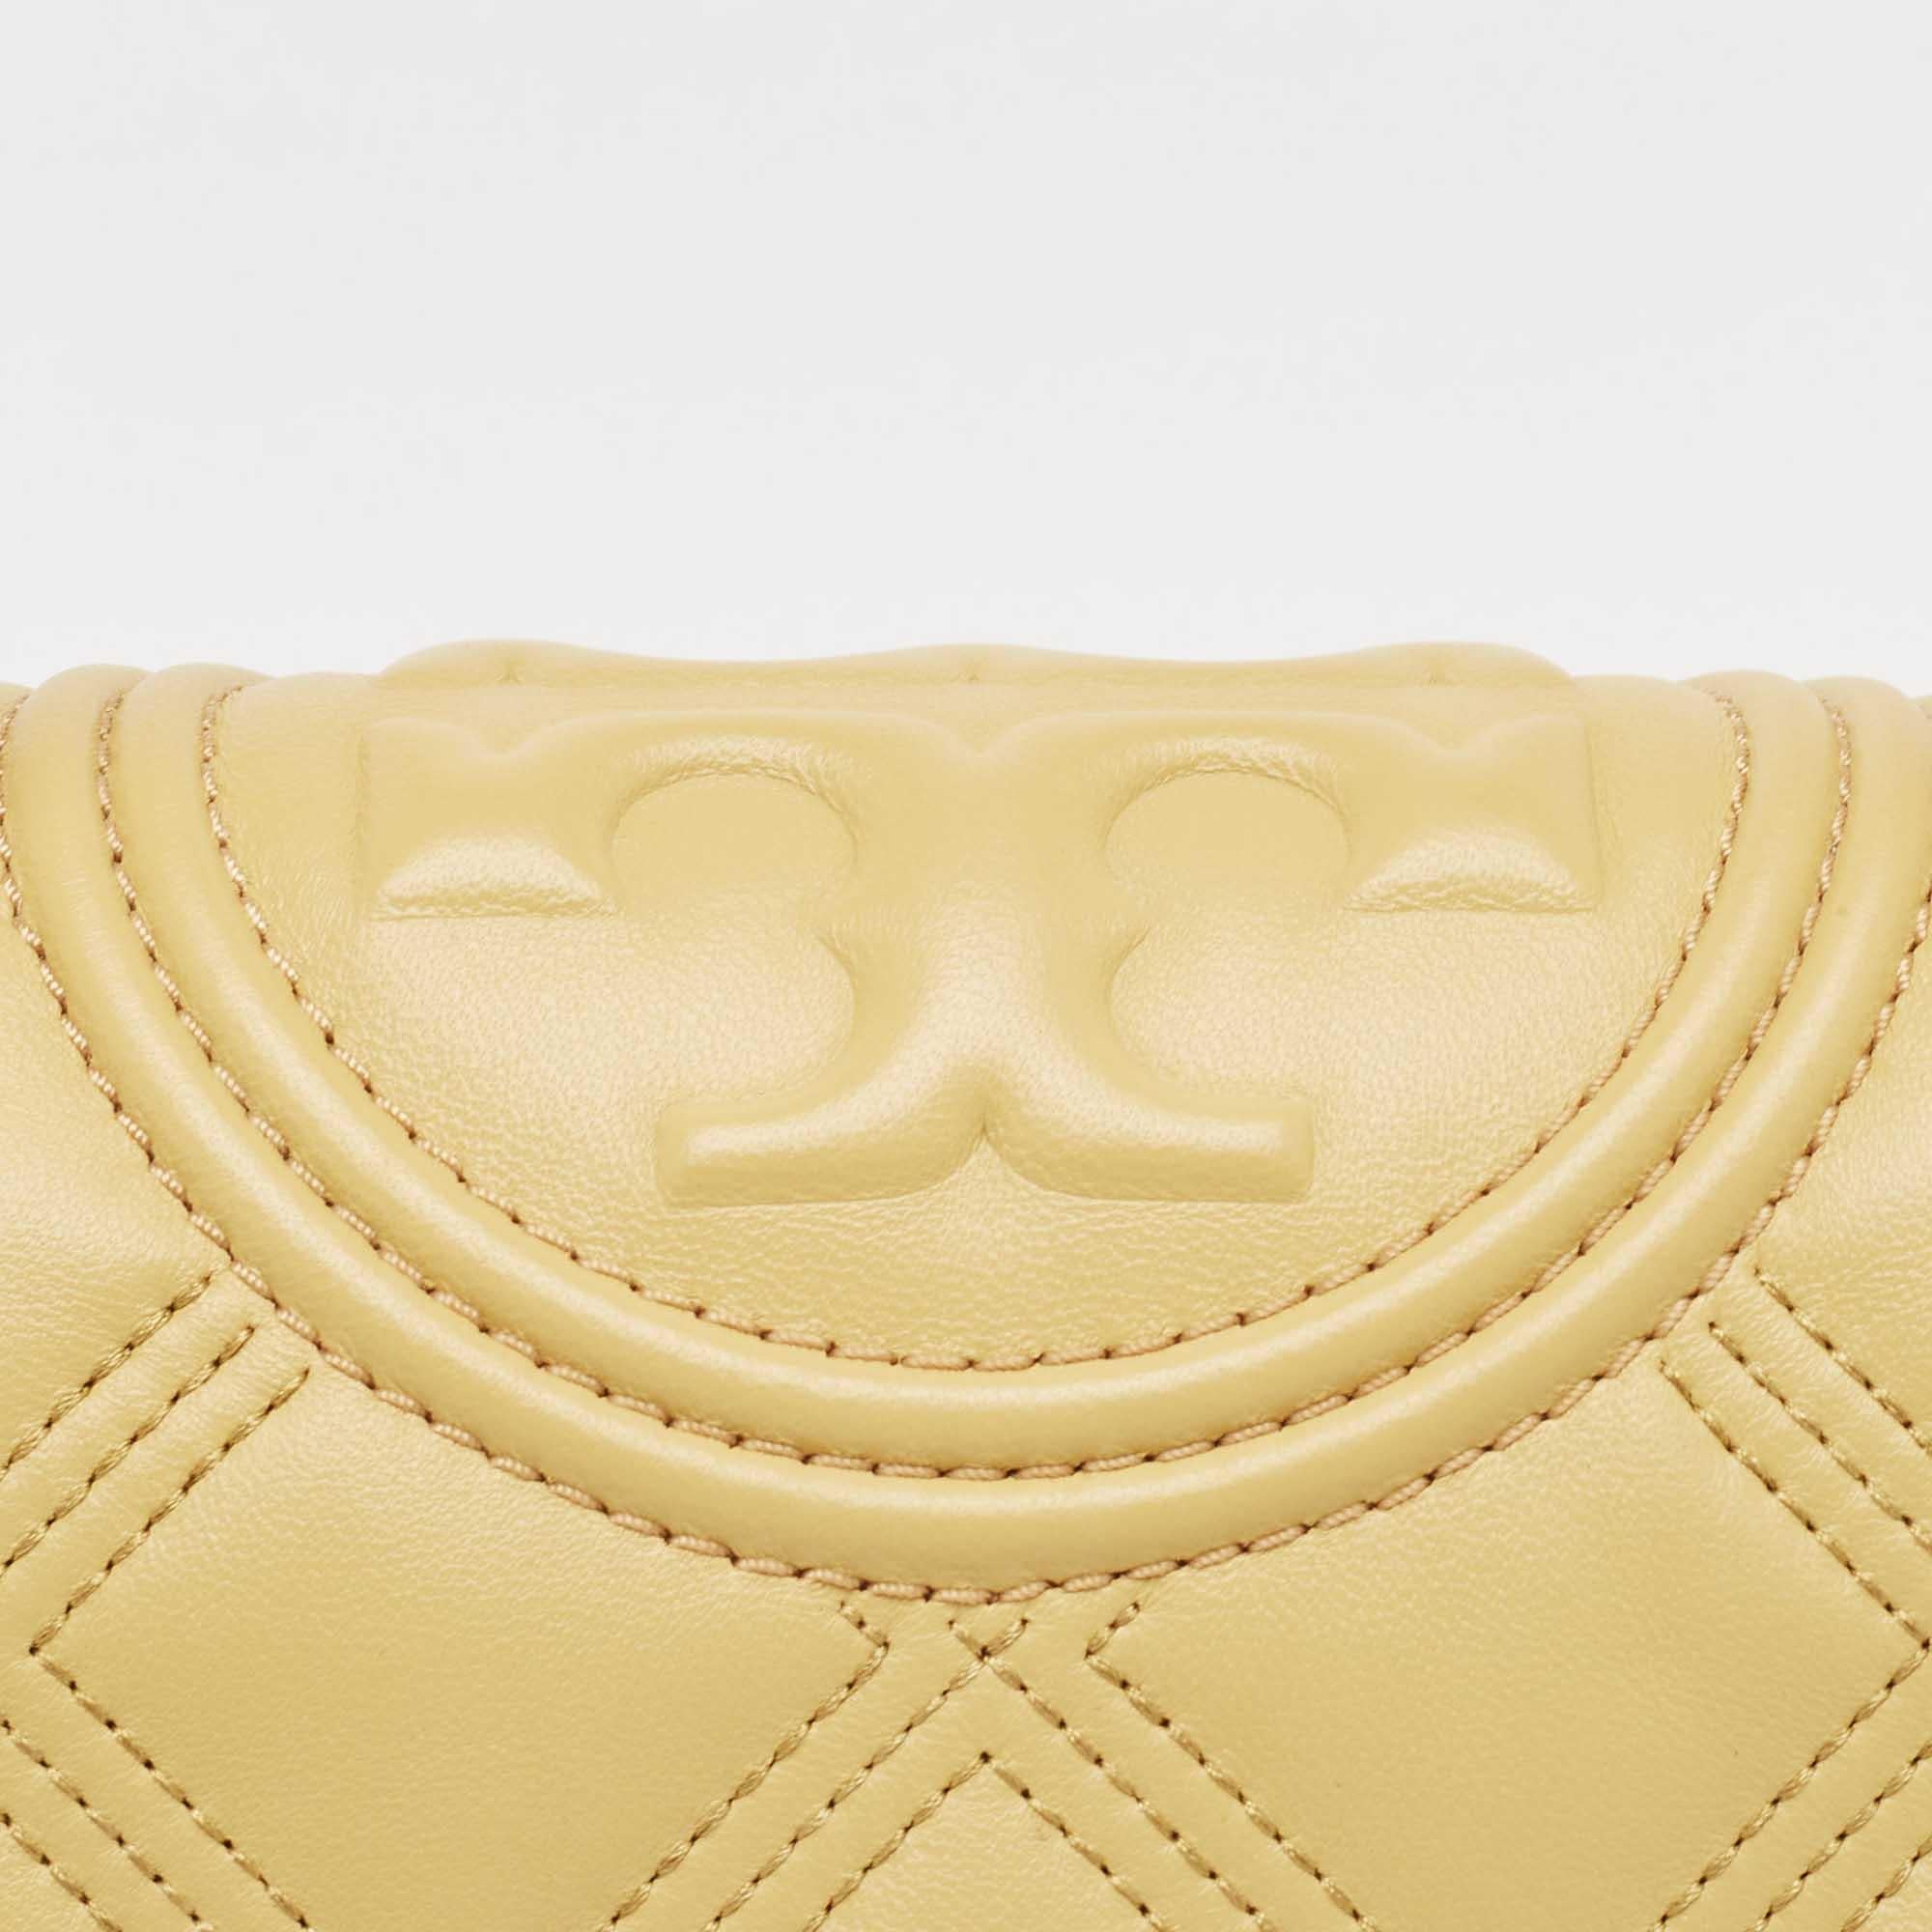 Women's Tory Burch Yellow Leather Fleming Shoulder Bag For Sale